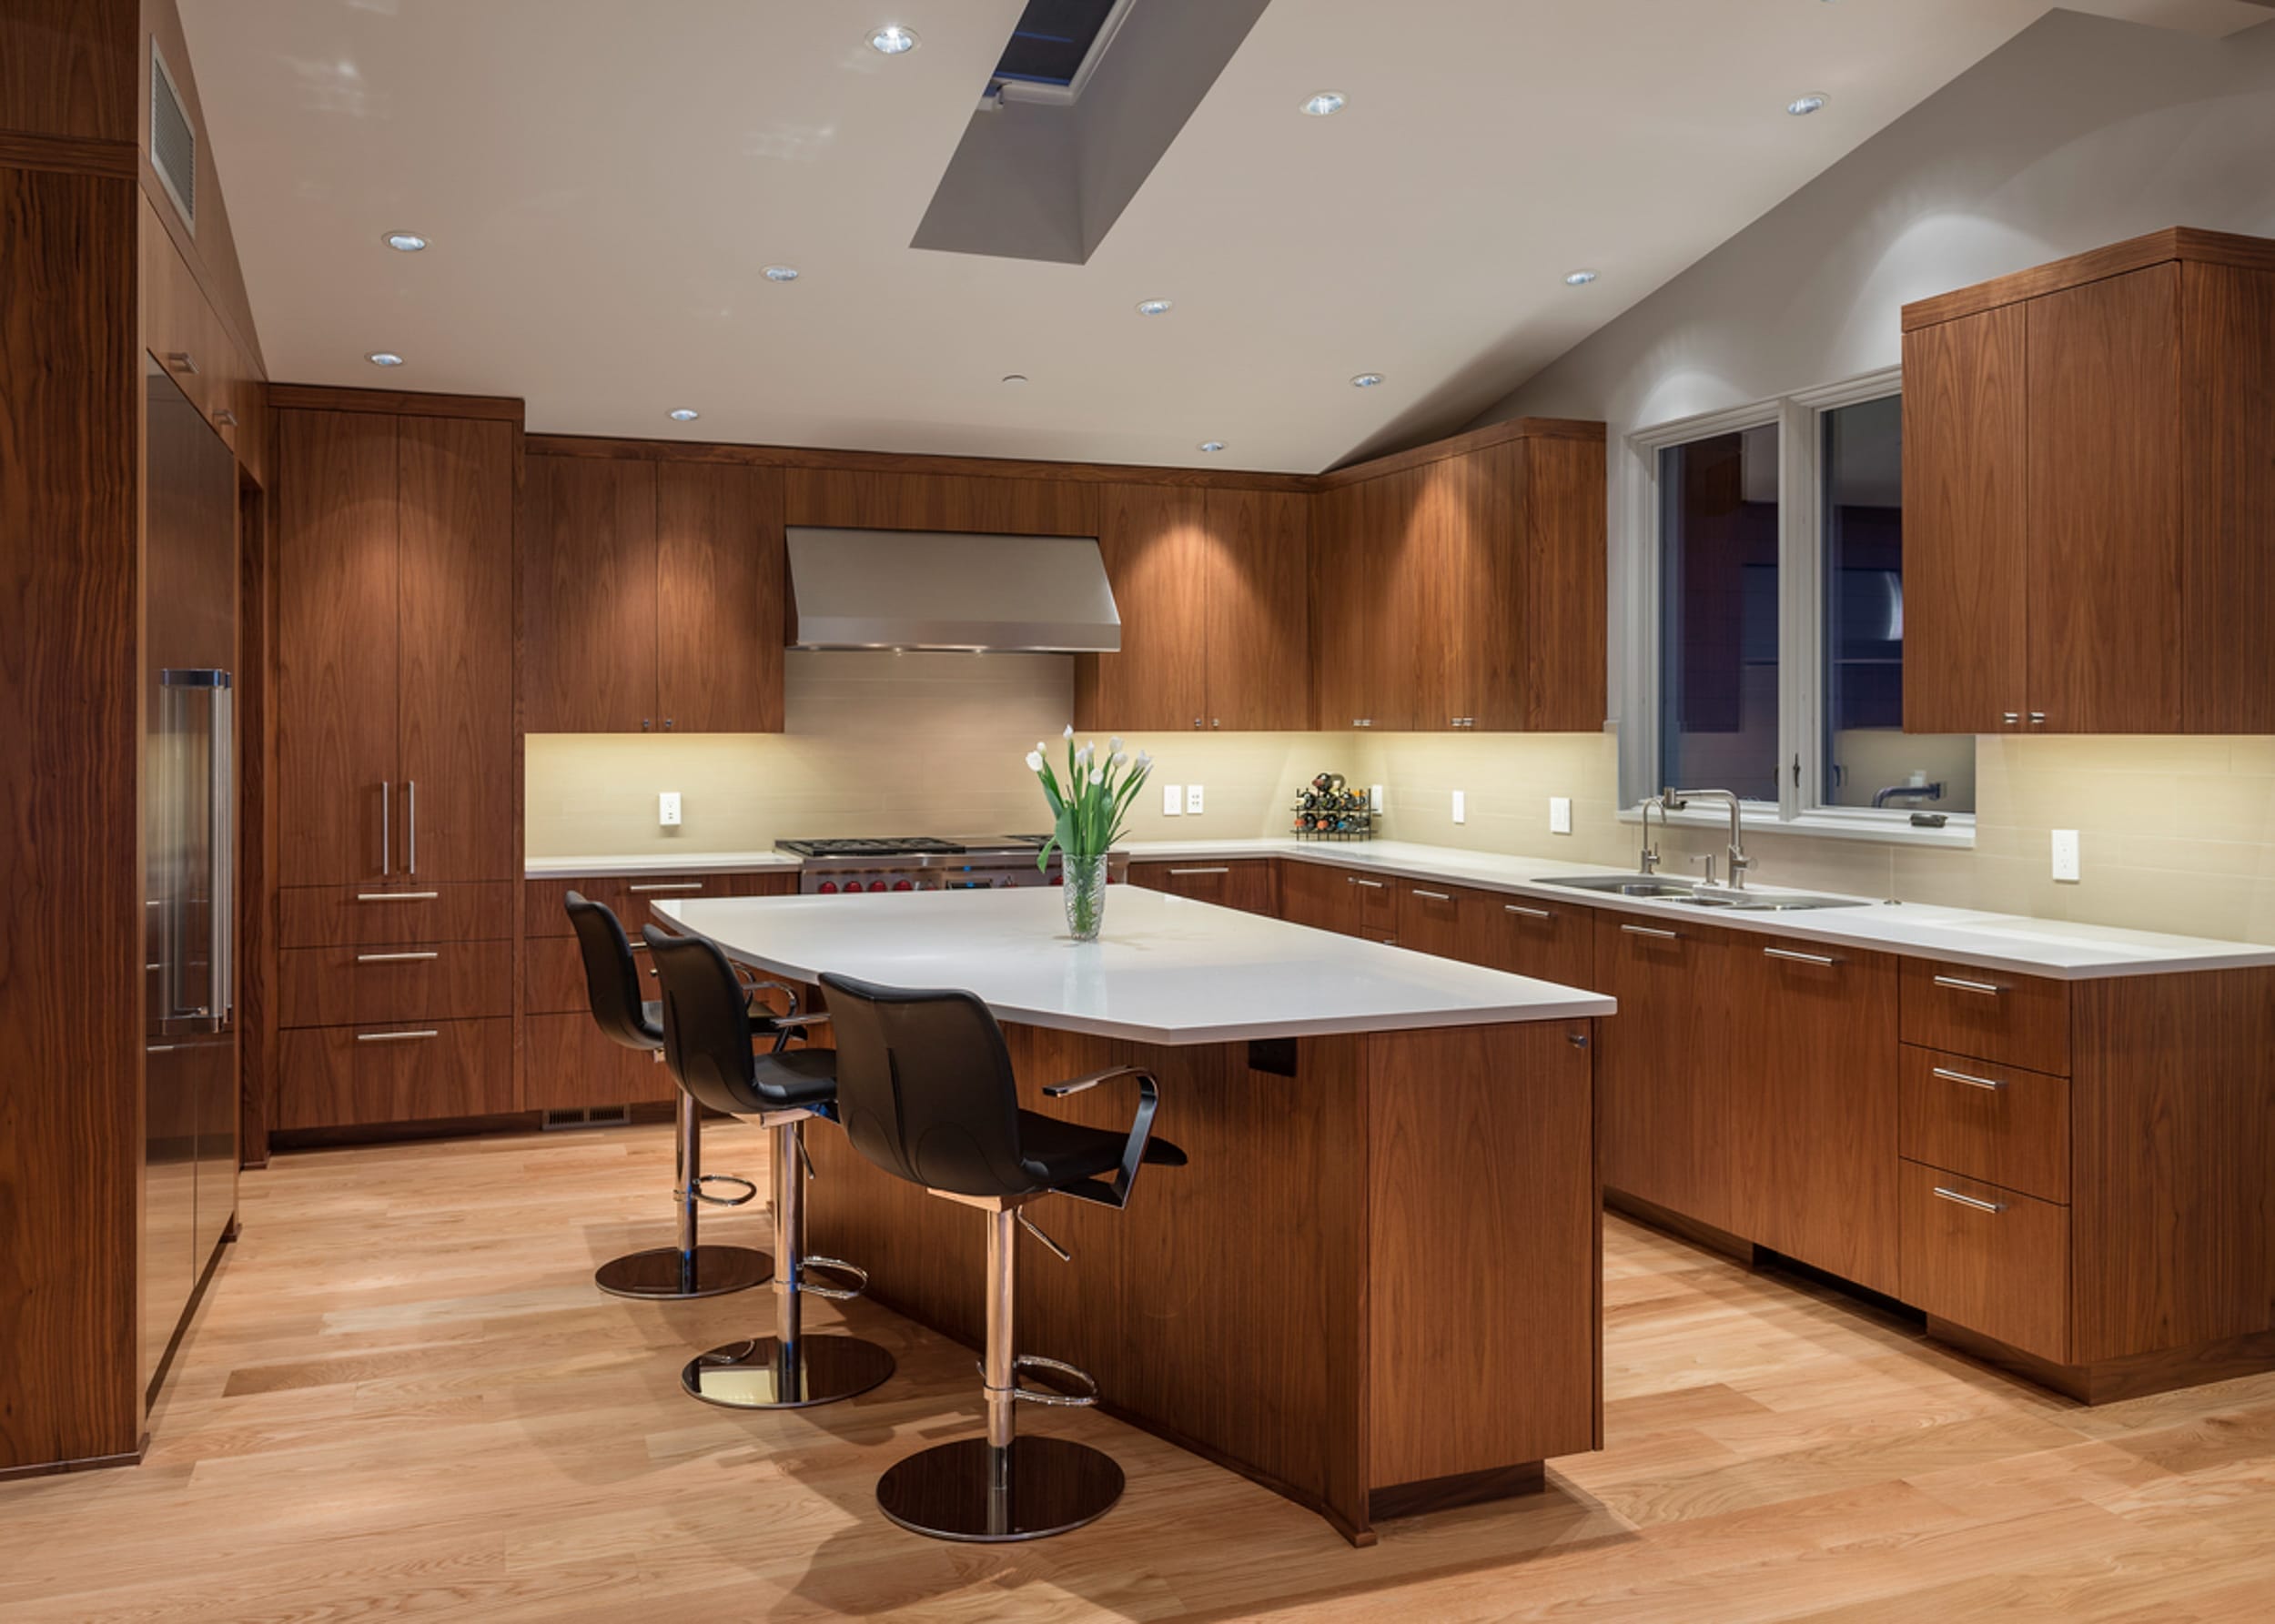 A modern kitchen with wooden cabinets and counter tops.